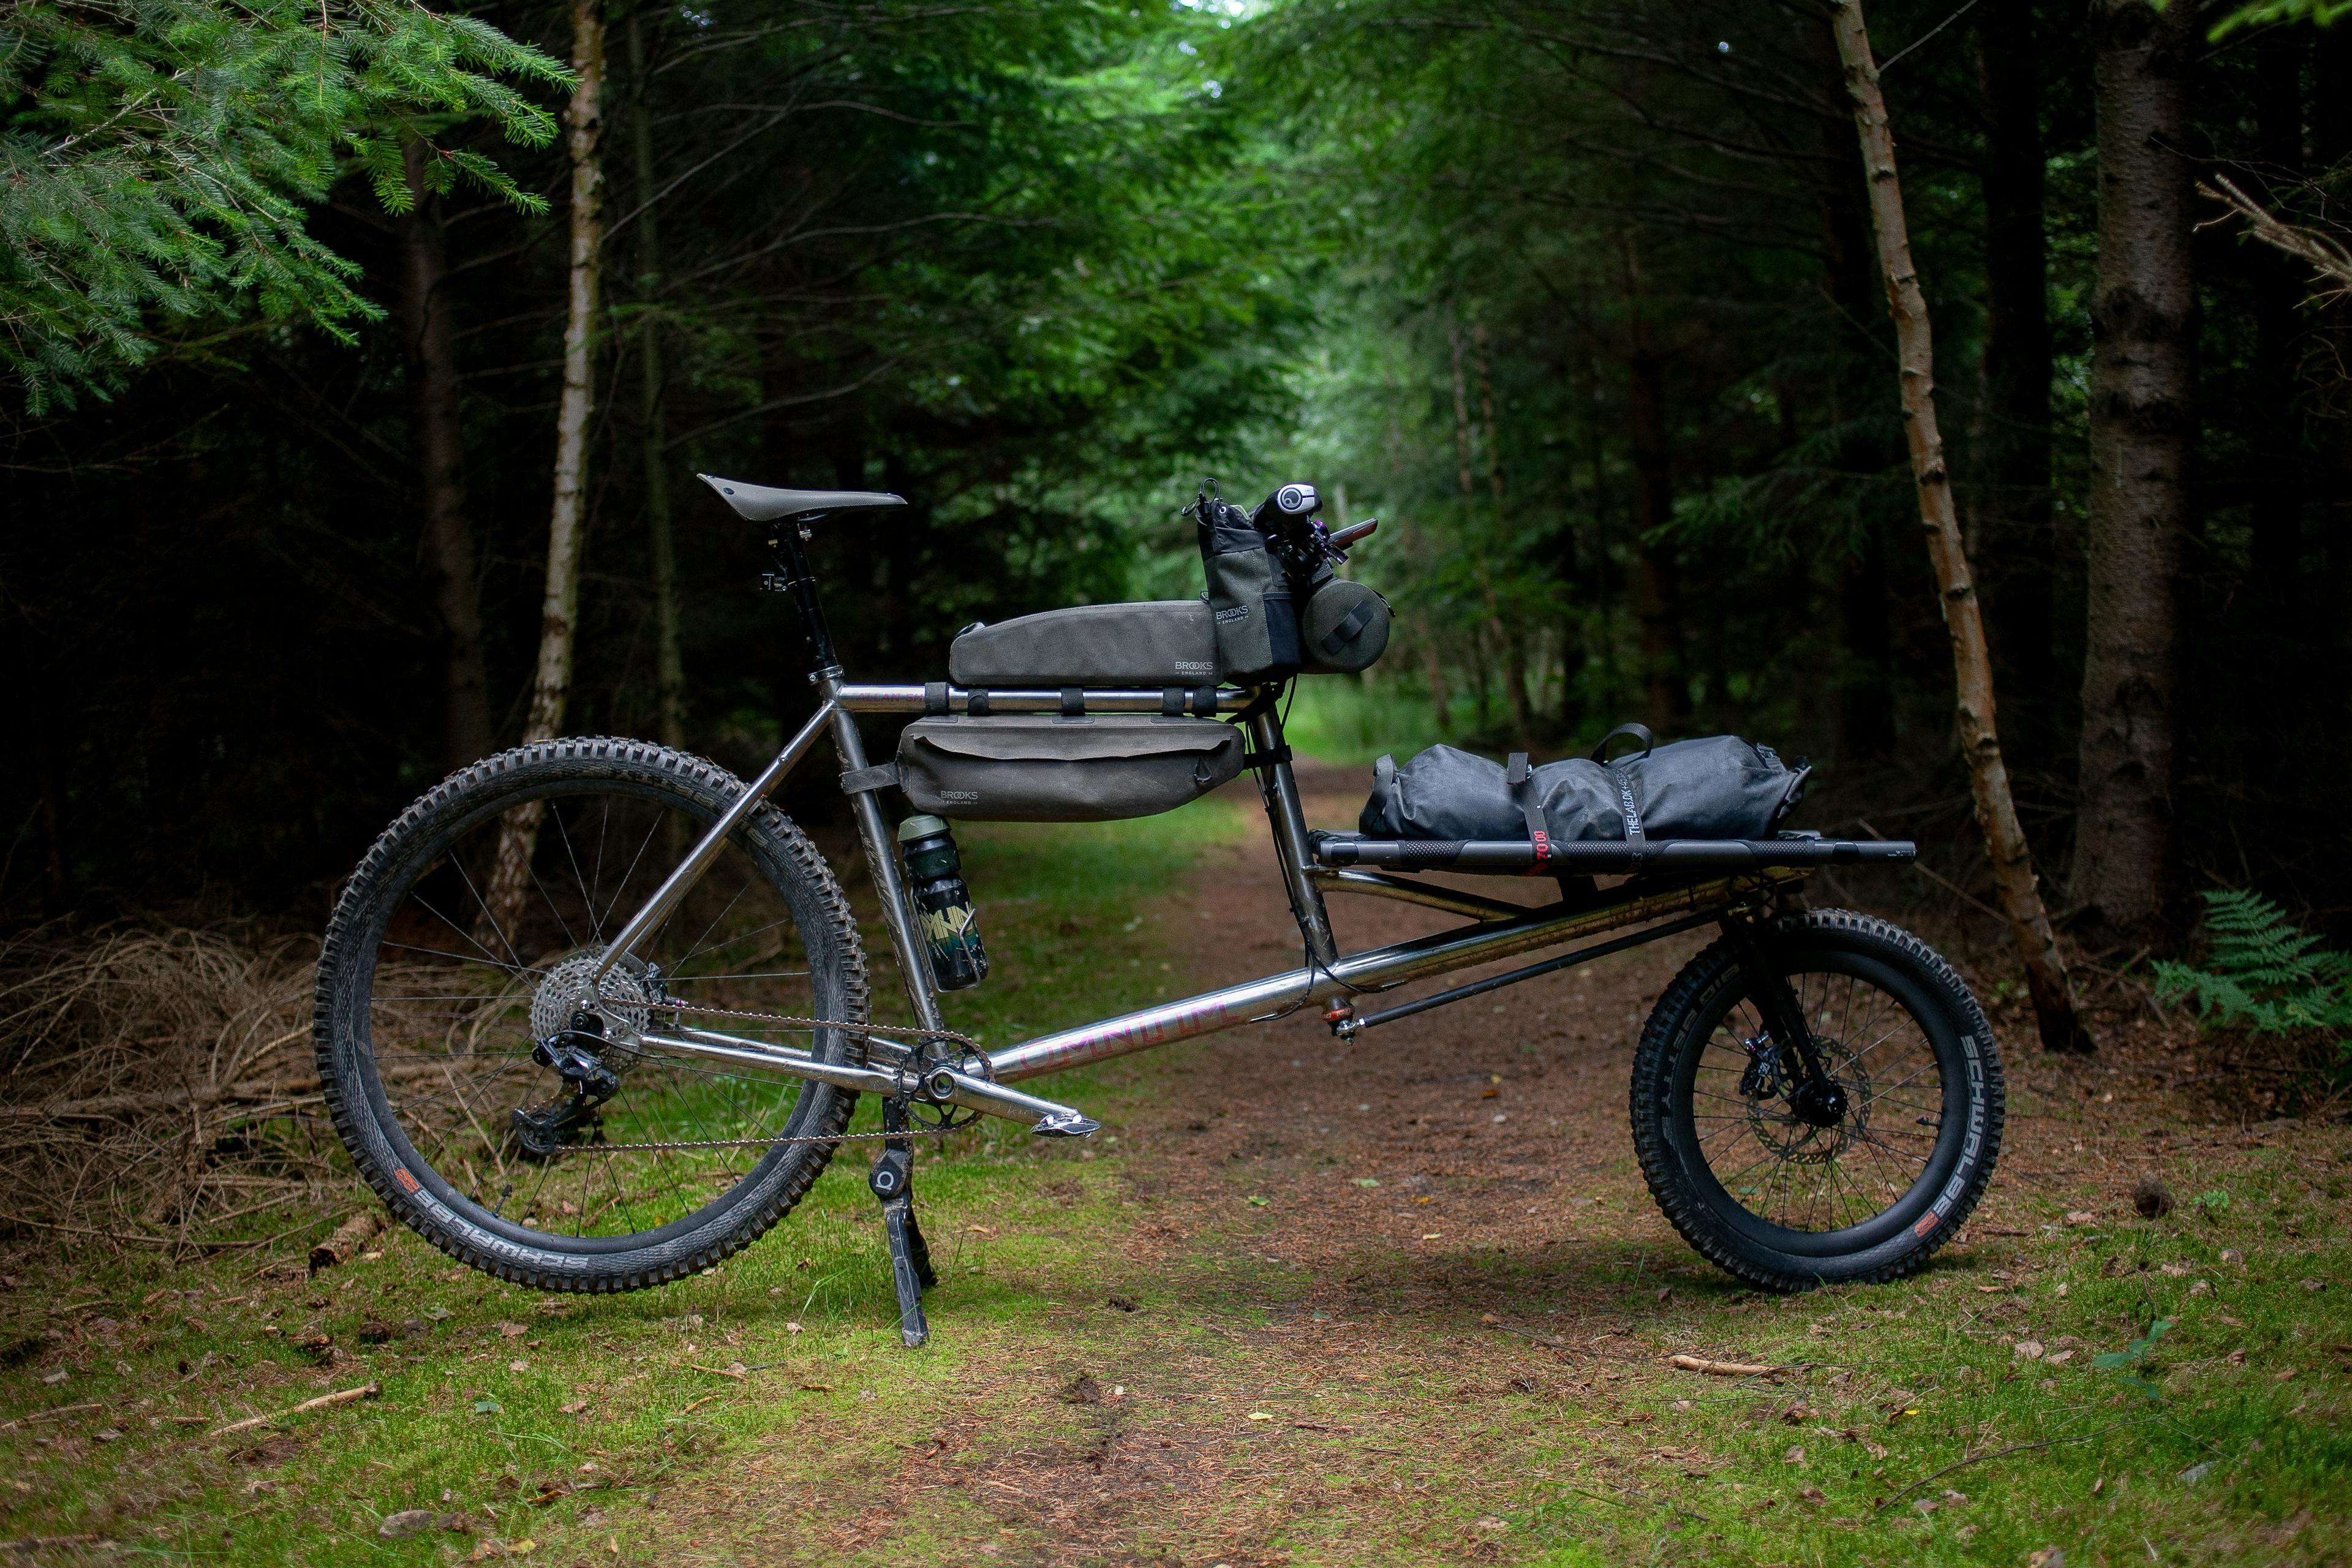 An Omnium cargo bike in the forest.